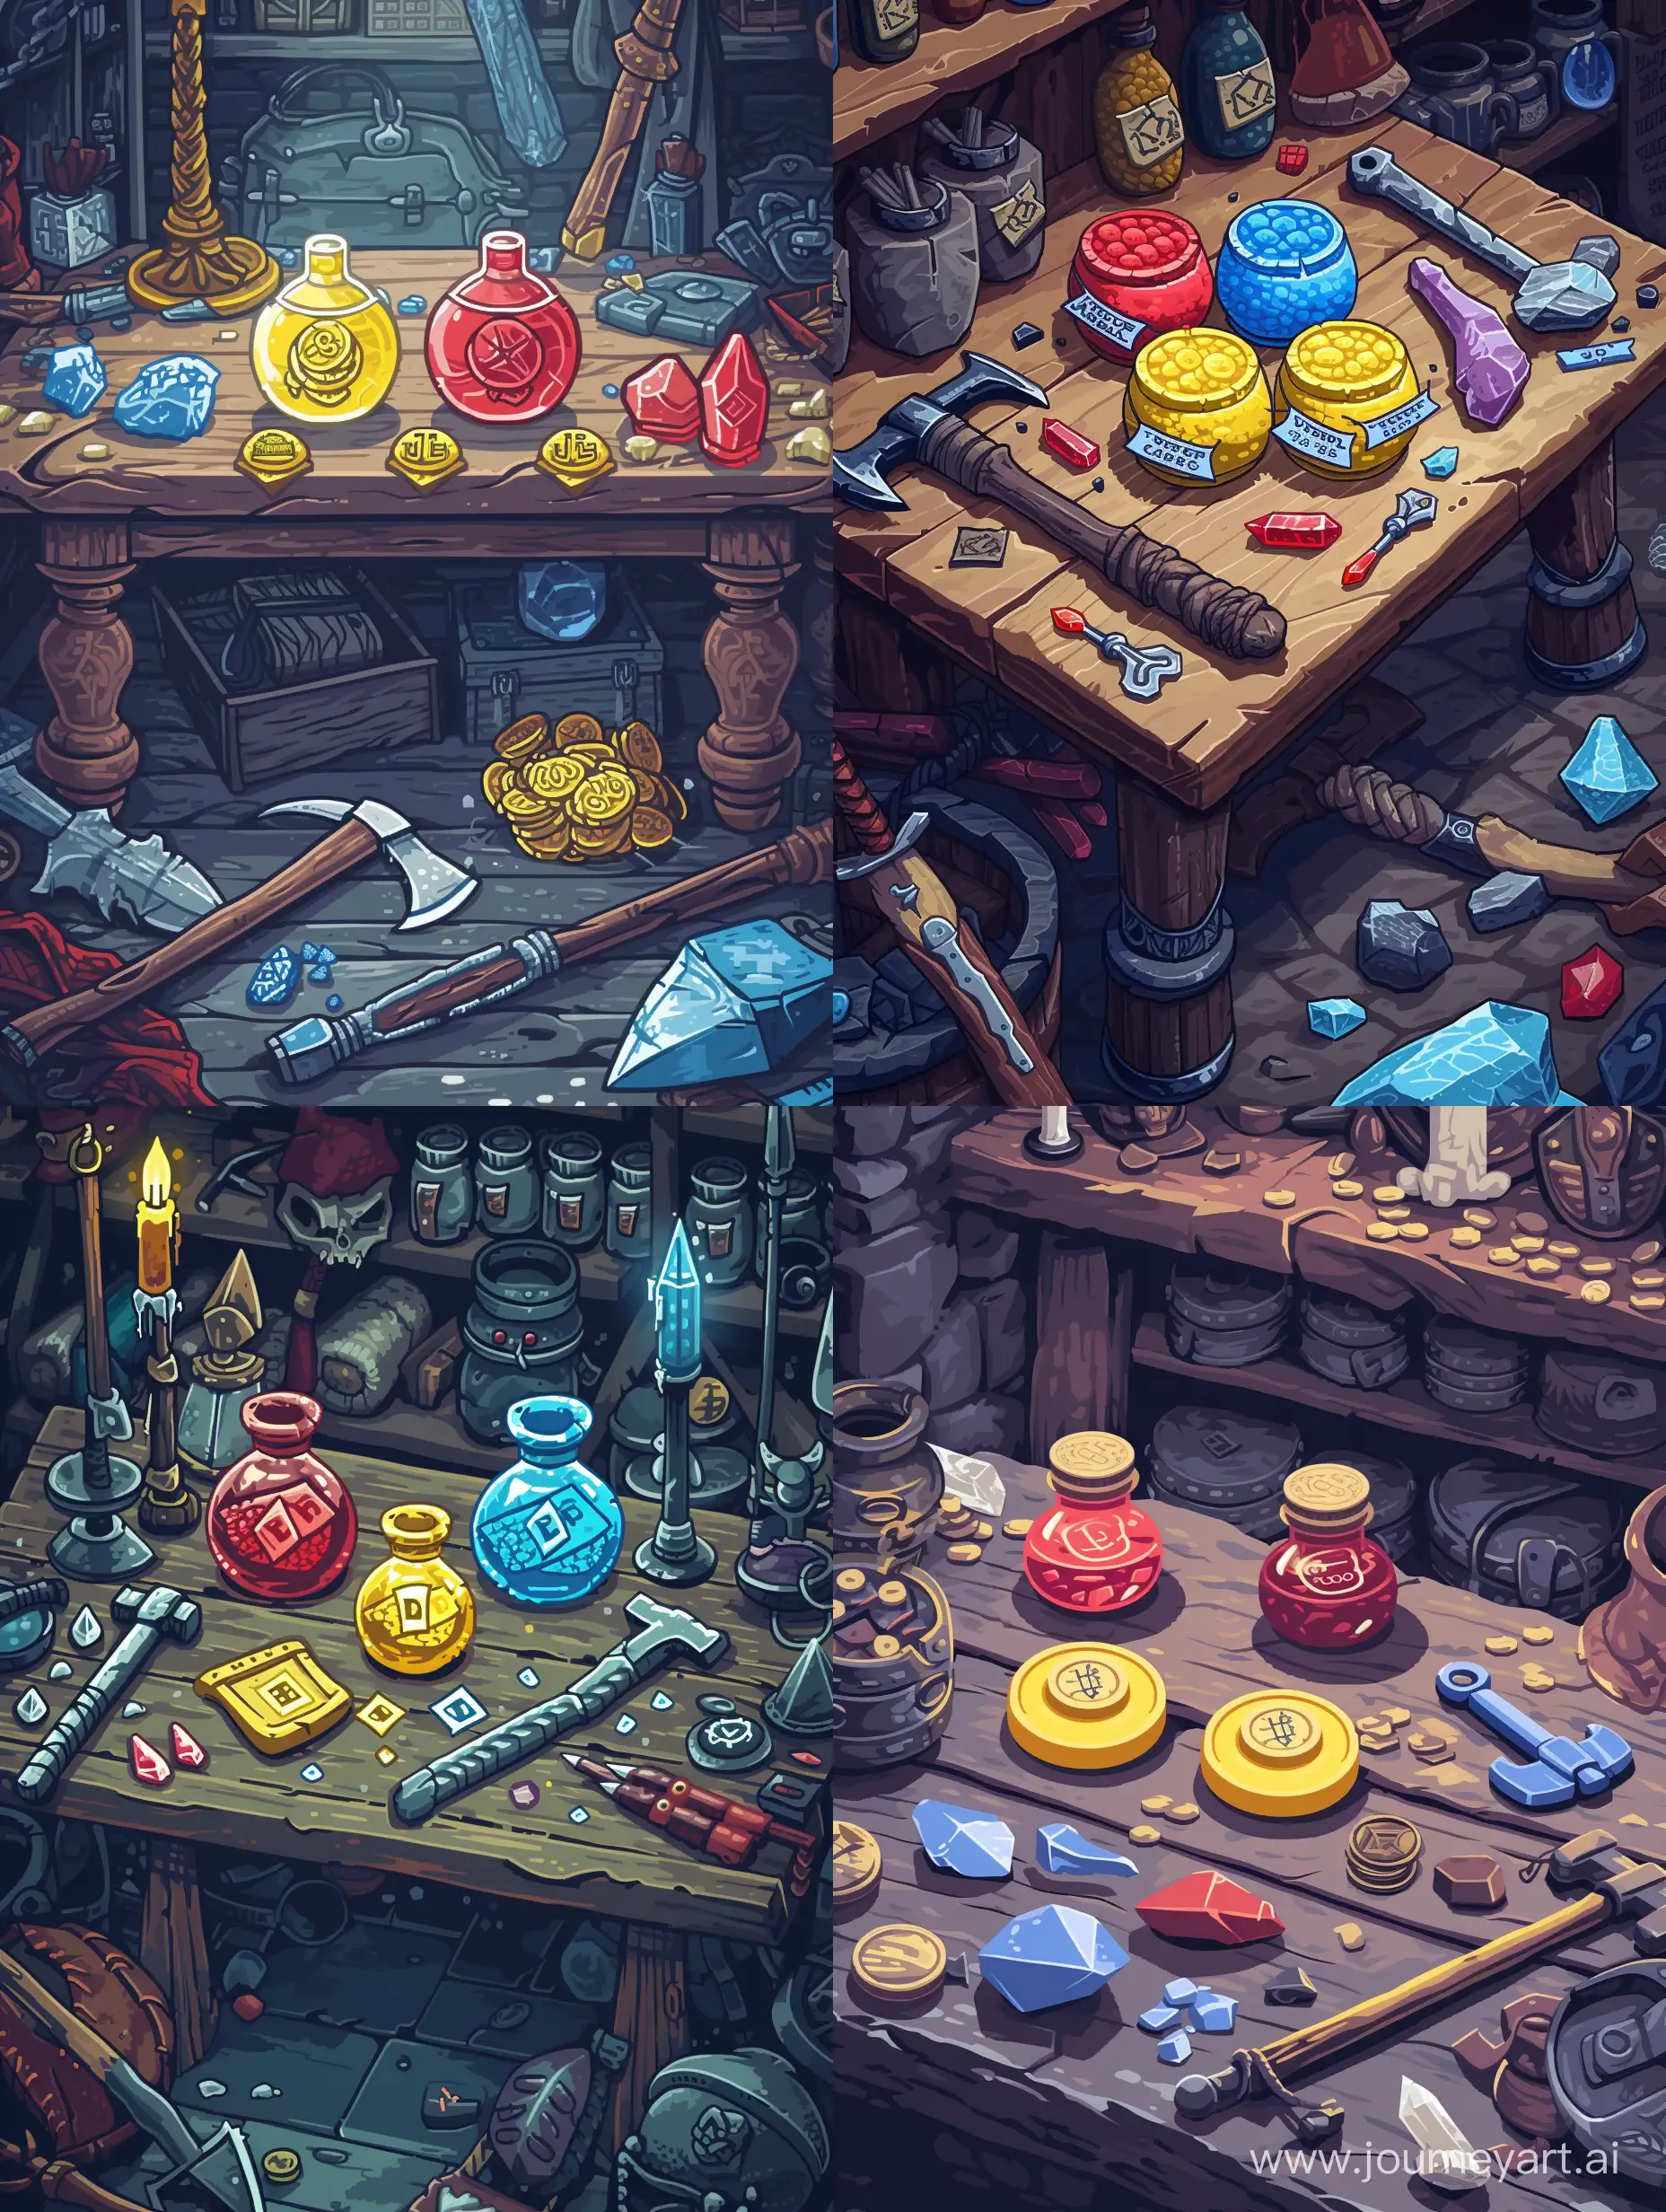 A table in the RPG merchant's shop with 3 potions on it: doubling coins (yellow), doubling lives (red) and freezing (blue). The potions have signature tags on them. There are crystals, staffs, axes, magic items, and armor lying around the table. Pixel-art style